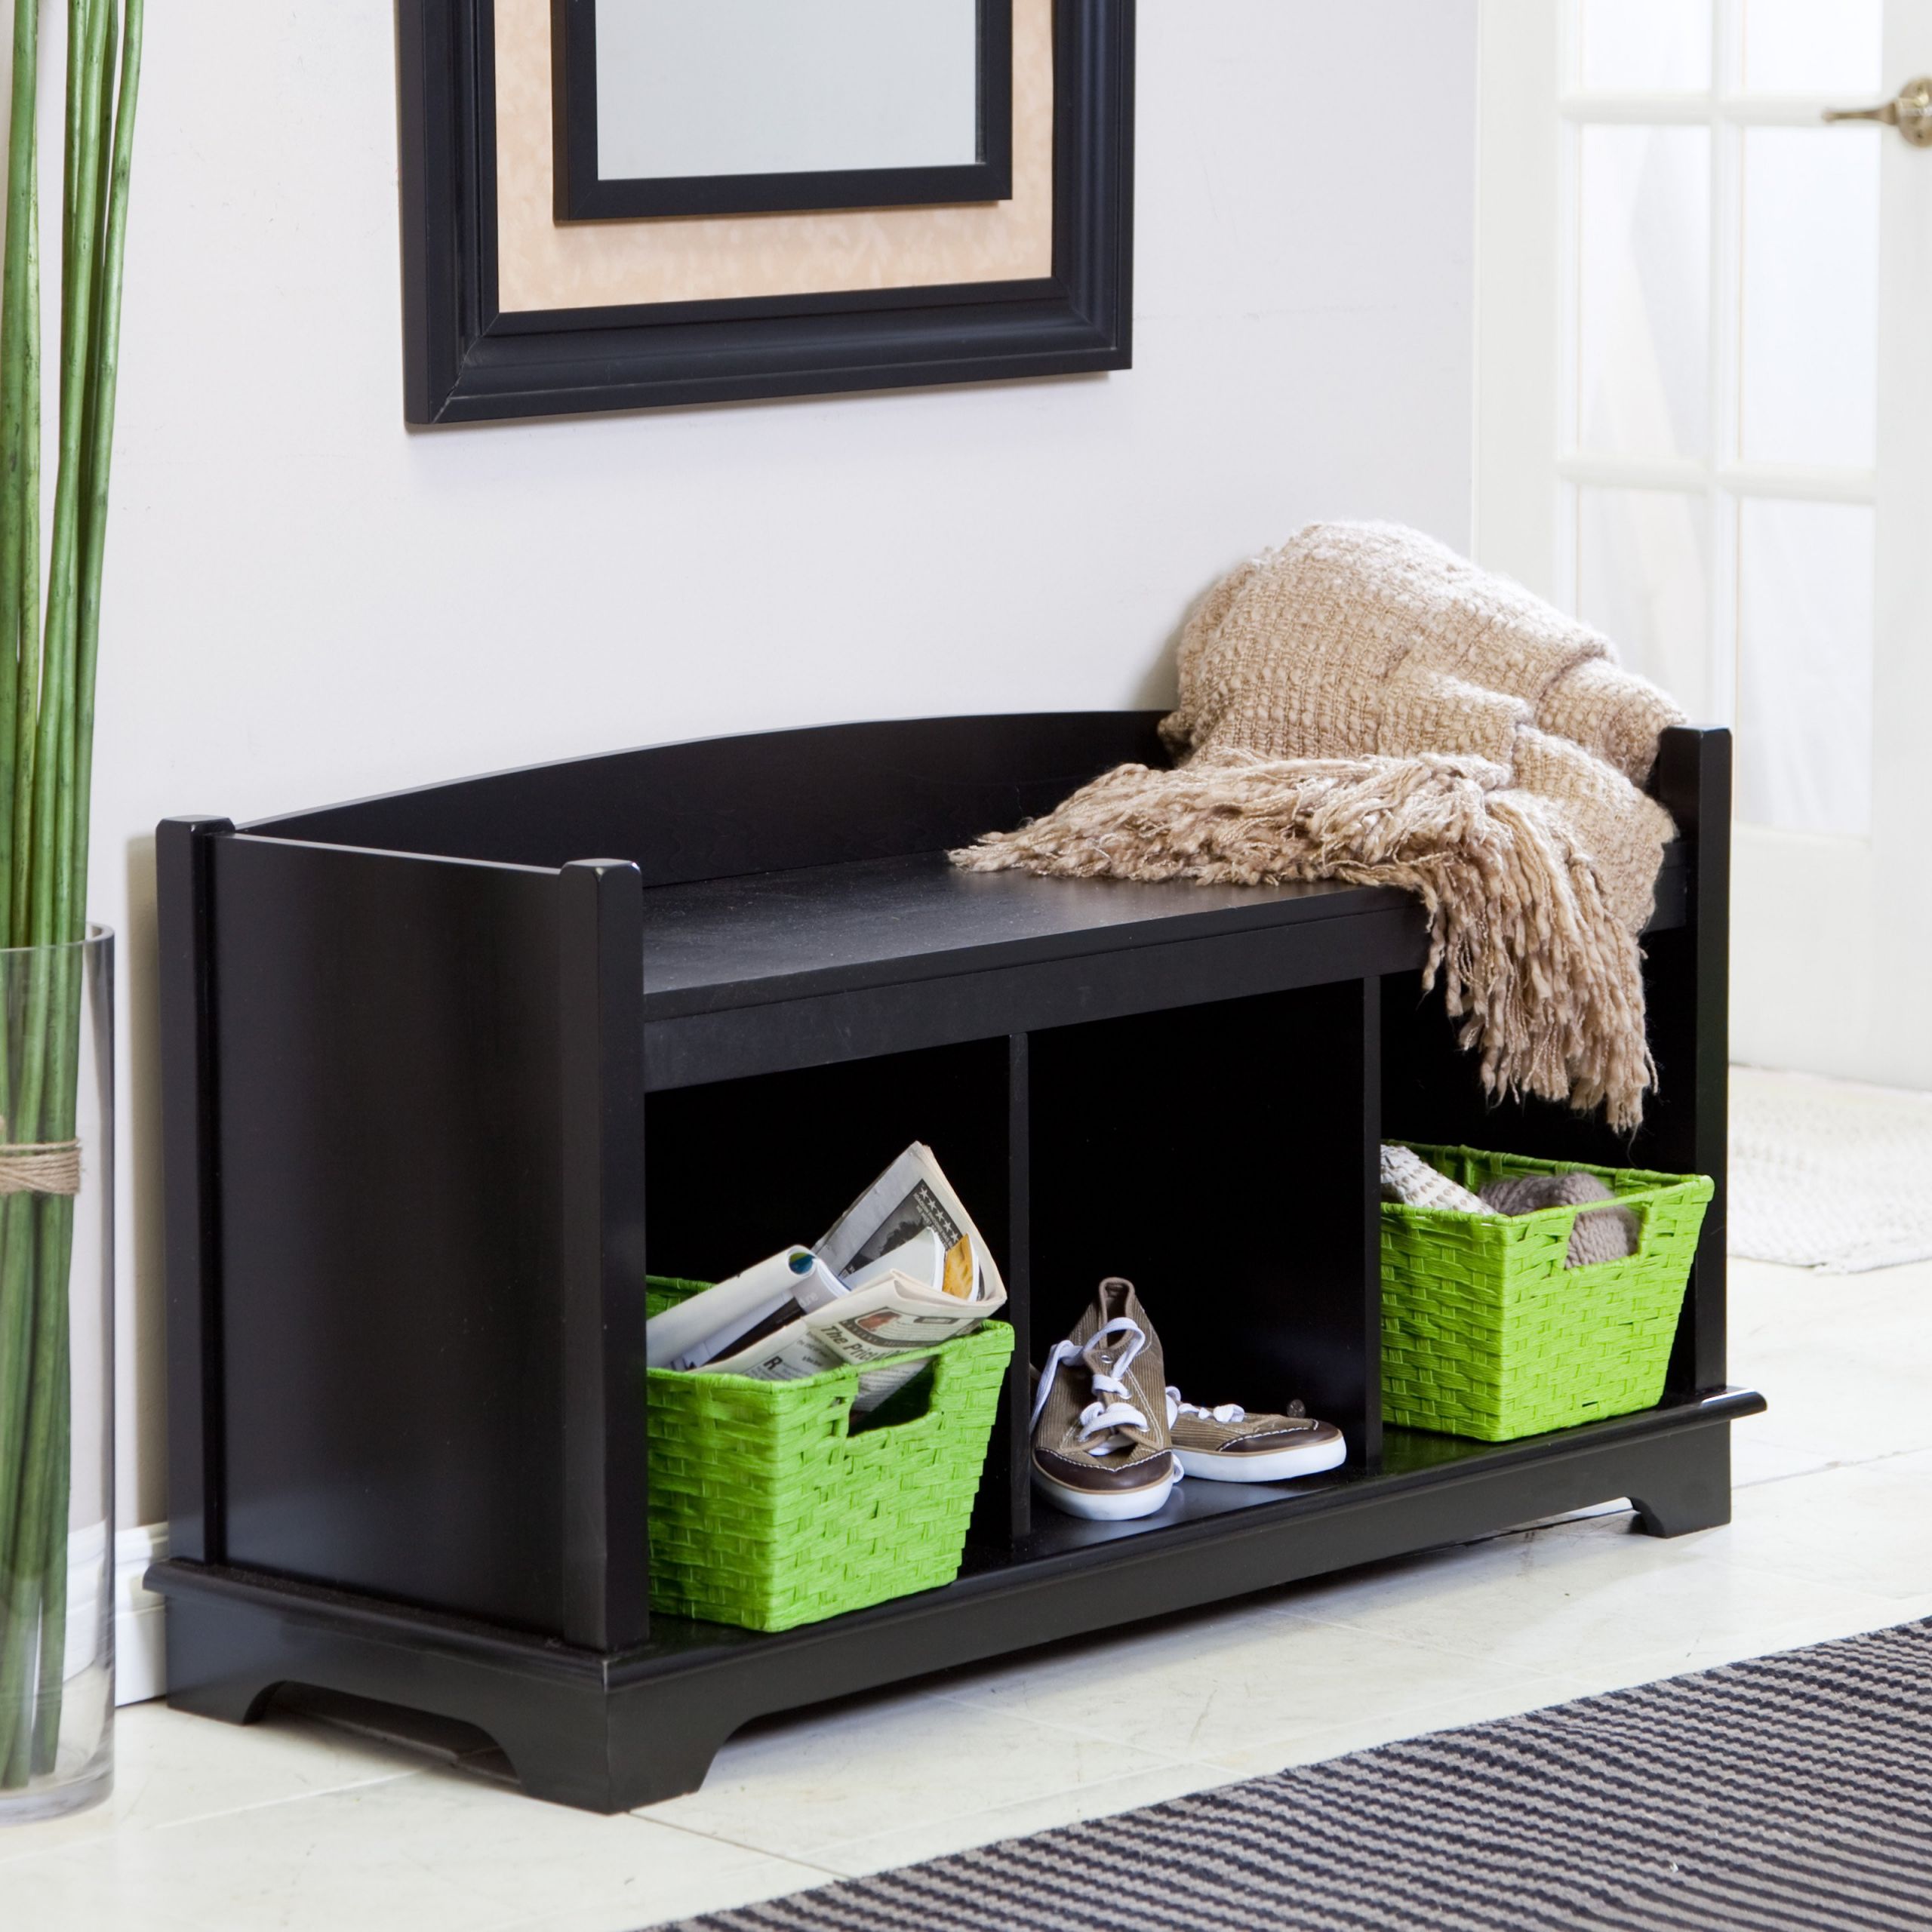 Cubby Storage Bench
 Entryway Bench With Cubbies